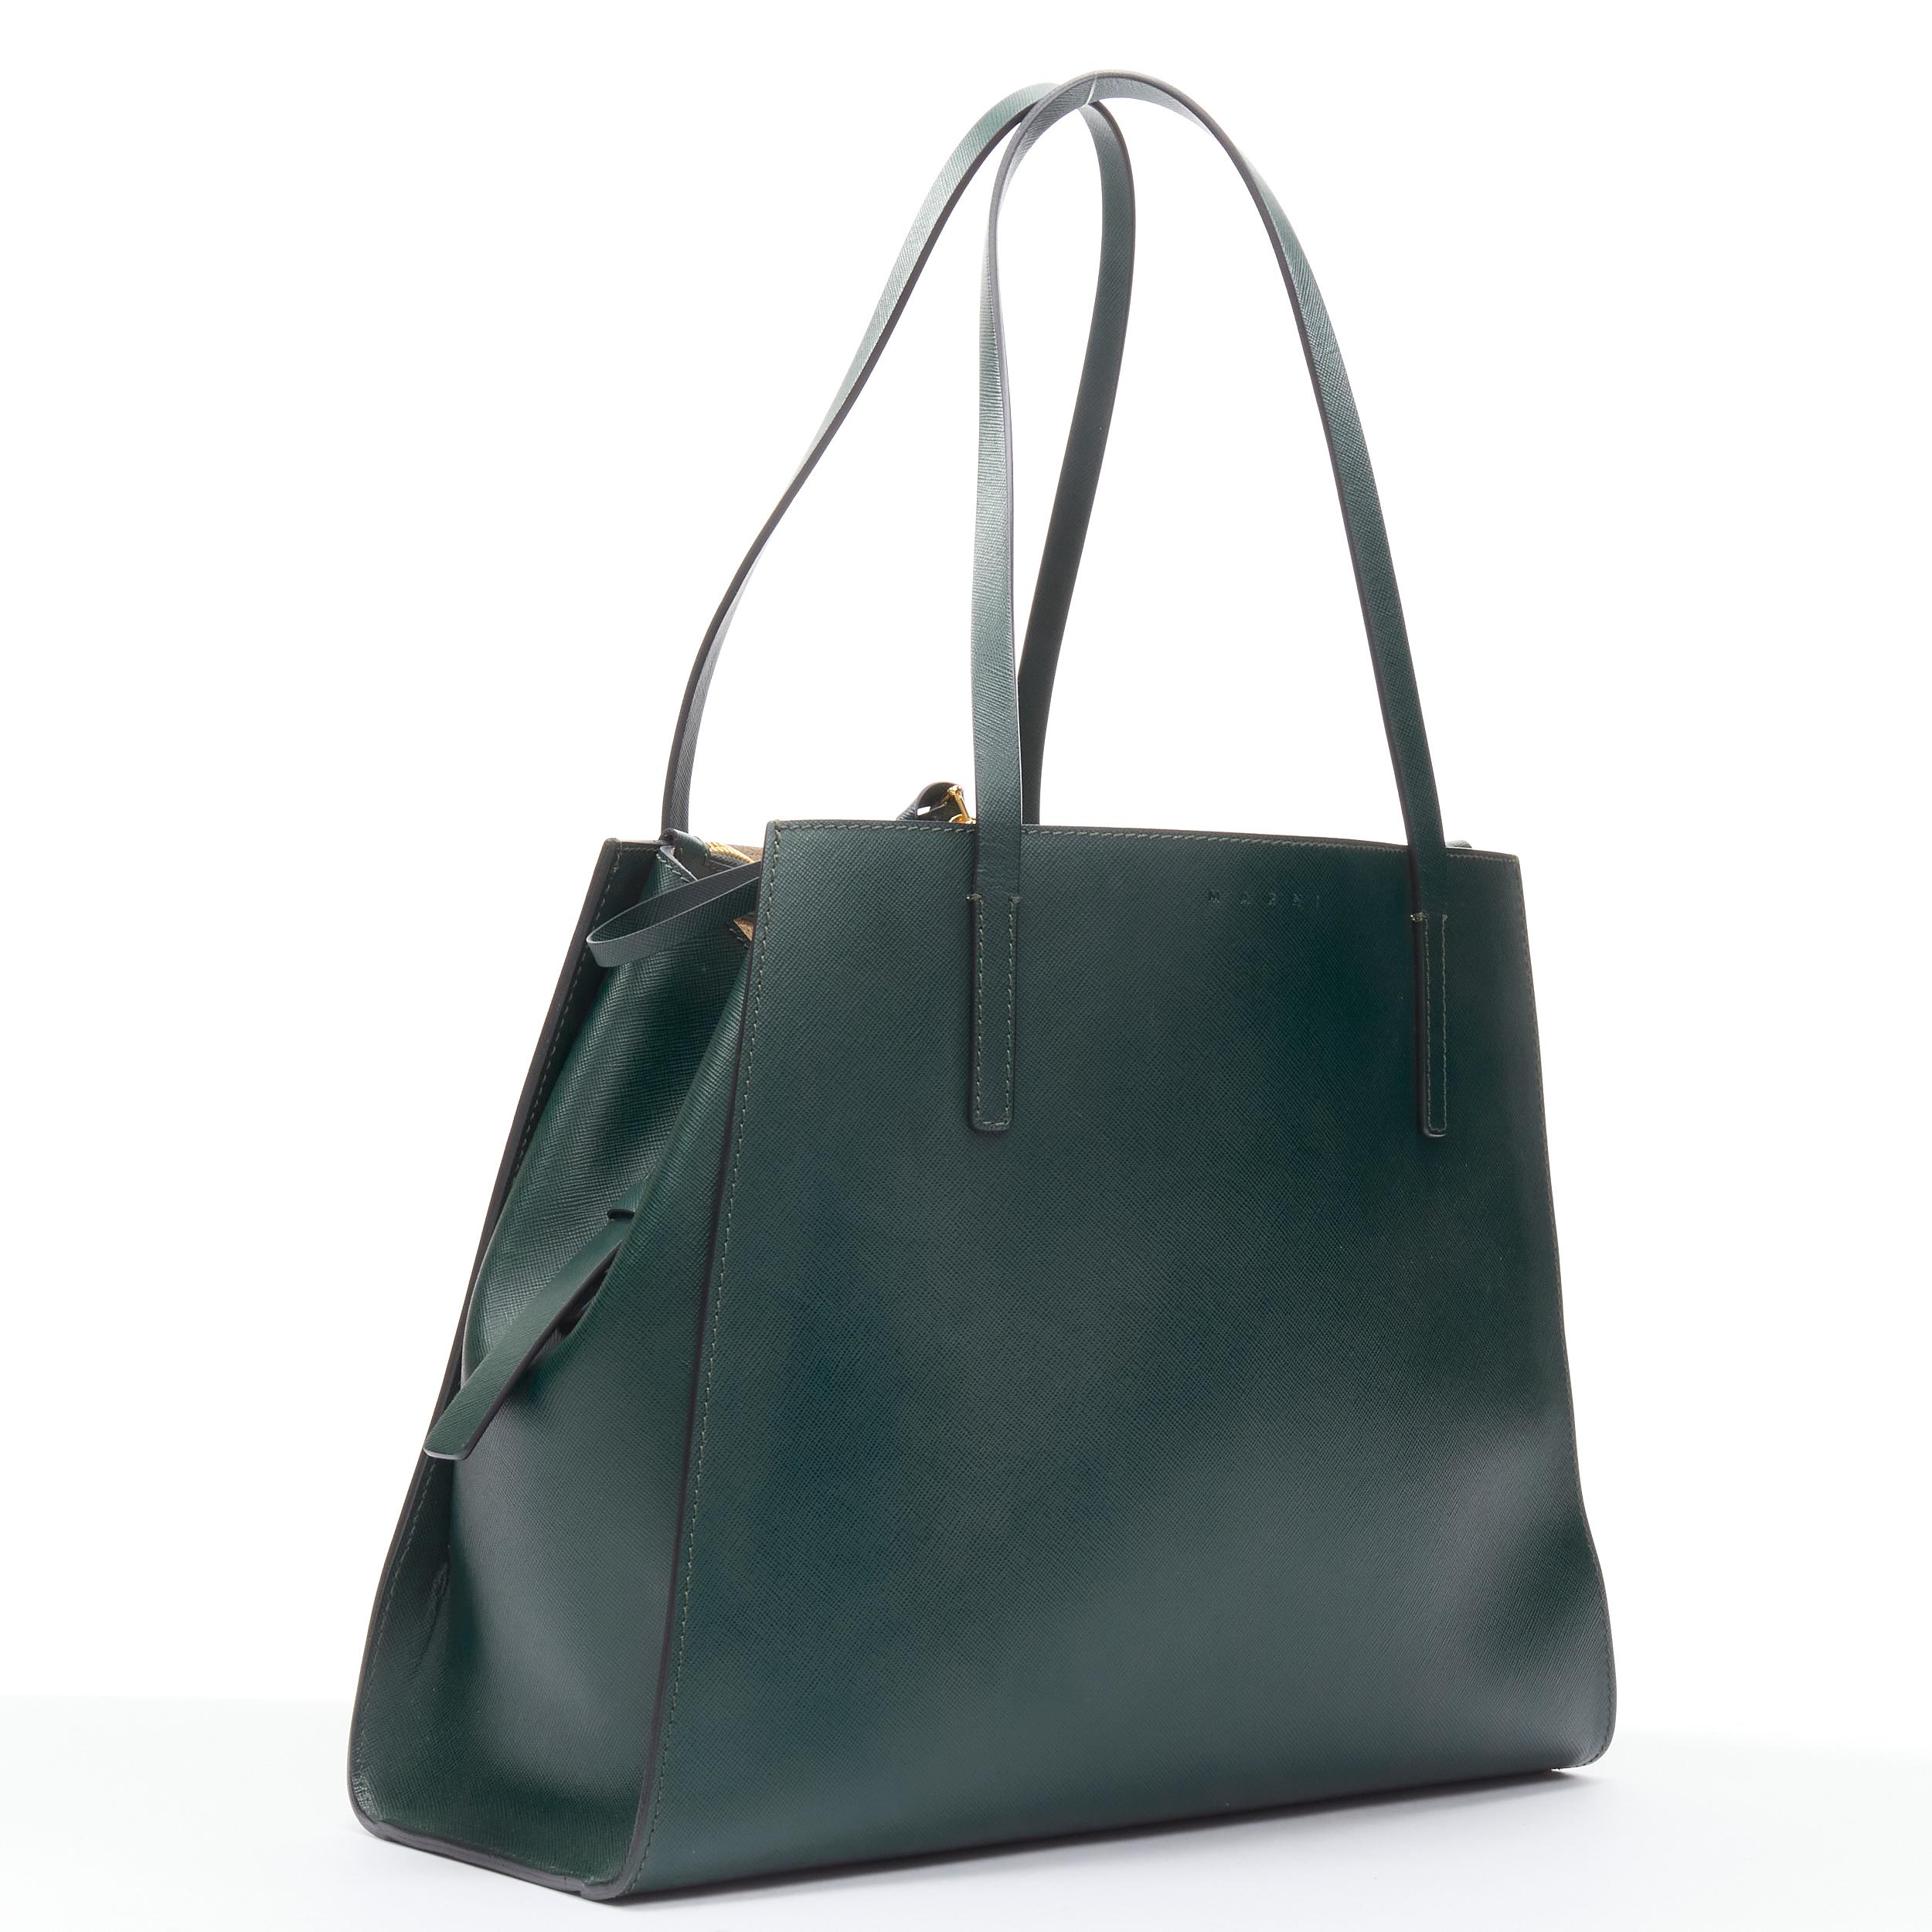 MARNI green saffiano leather top zip asymmetric structured tote bag
Reference: CELG/A00012
Brand: Marni
Model: Asymmetrical tote
Material: Leather
Color: Green
Pattern: Solid
Closure: Zip
Lining: Suede
Extra Details: Gold hardware. 2 zip